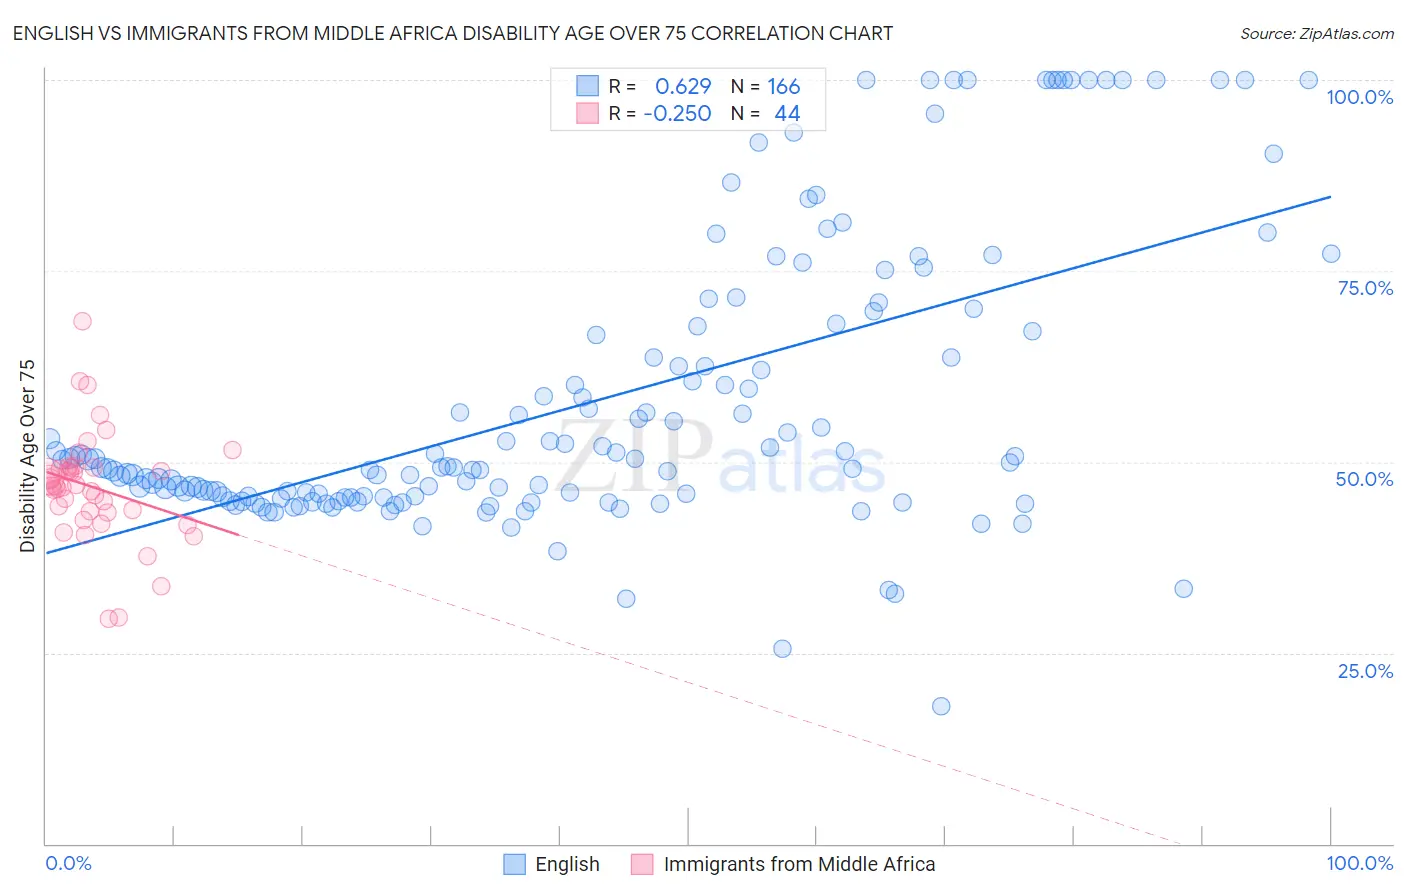 English vs Immigrants from Middle Africa Disability Age Over 75